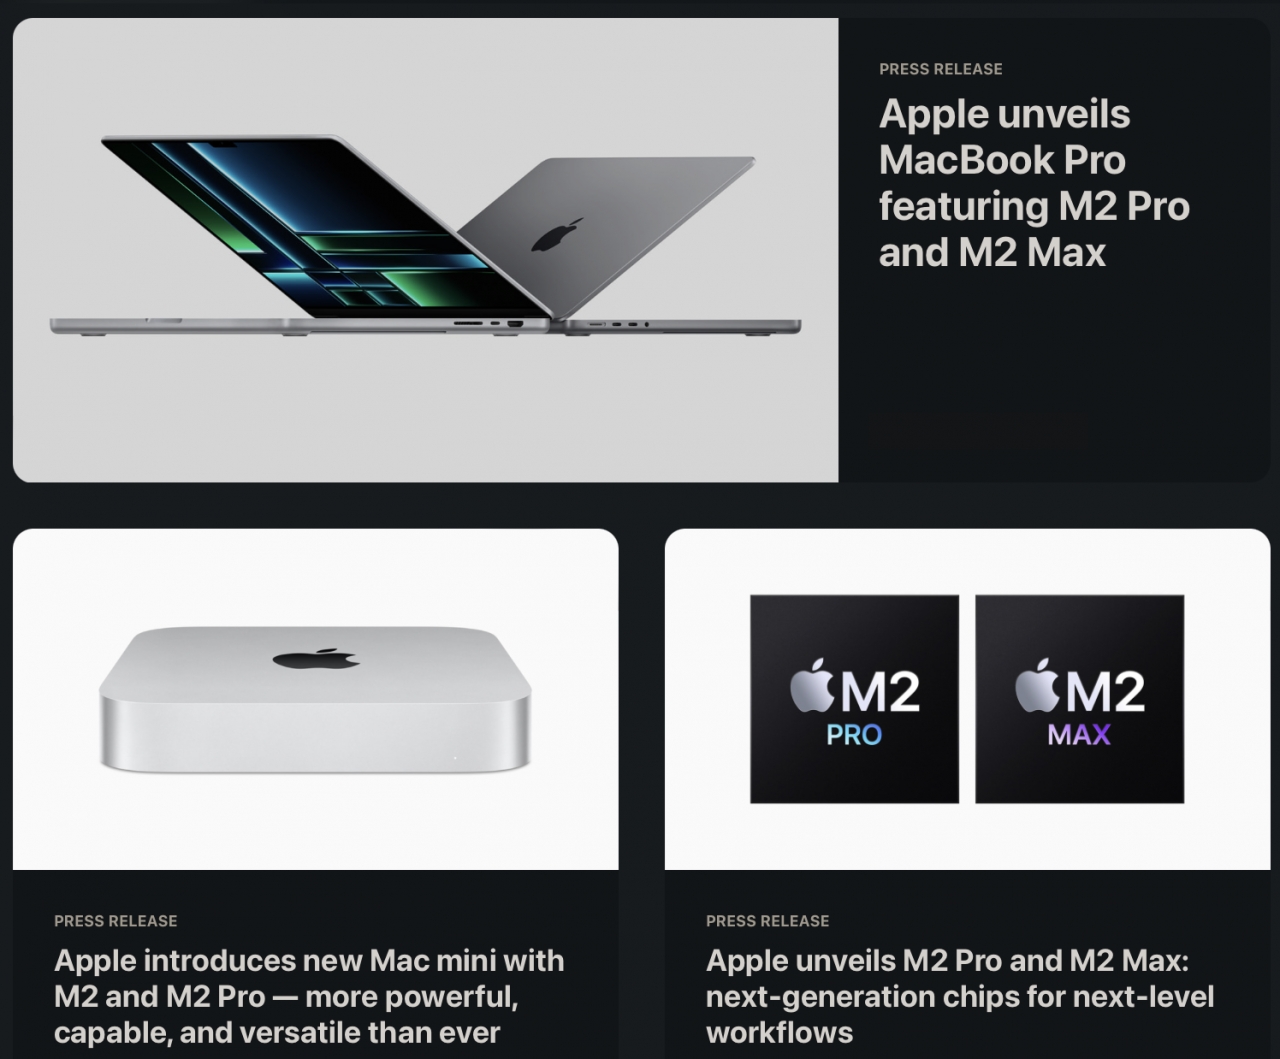 Apple introduces new Mac mini with M2 and M2 Pro — more powerful, capable,  and versatile than ever - Apple